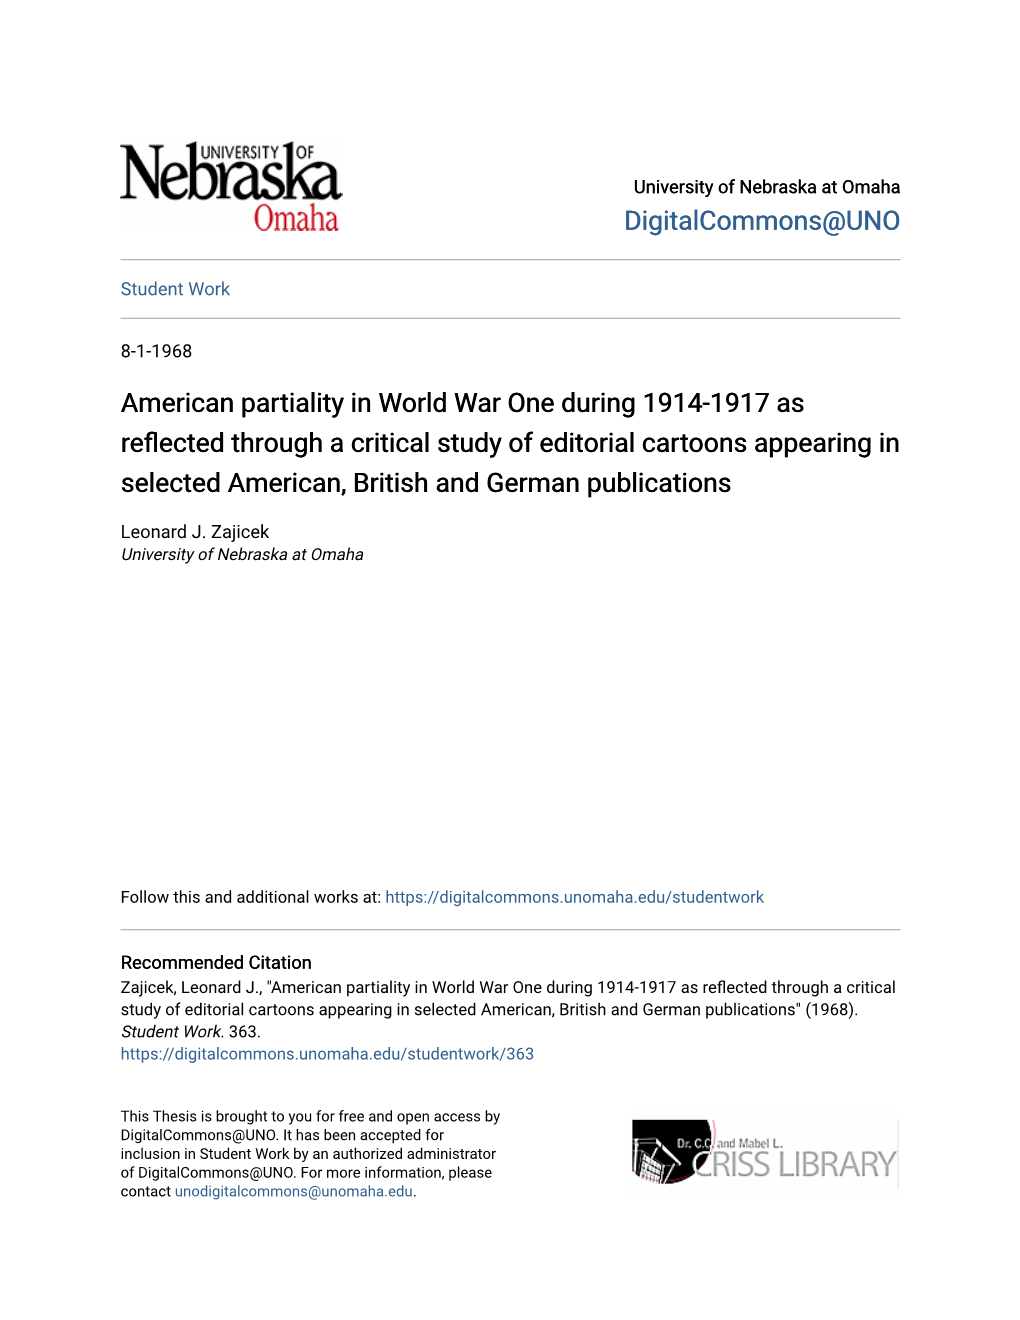 American Partiality in World War One During 1914-1917 As Reflected